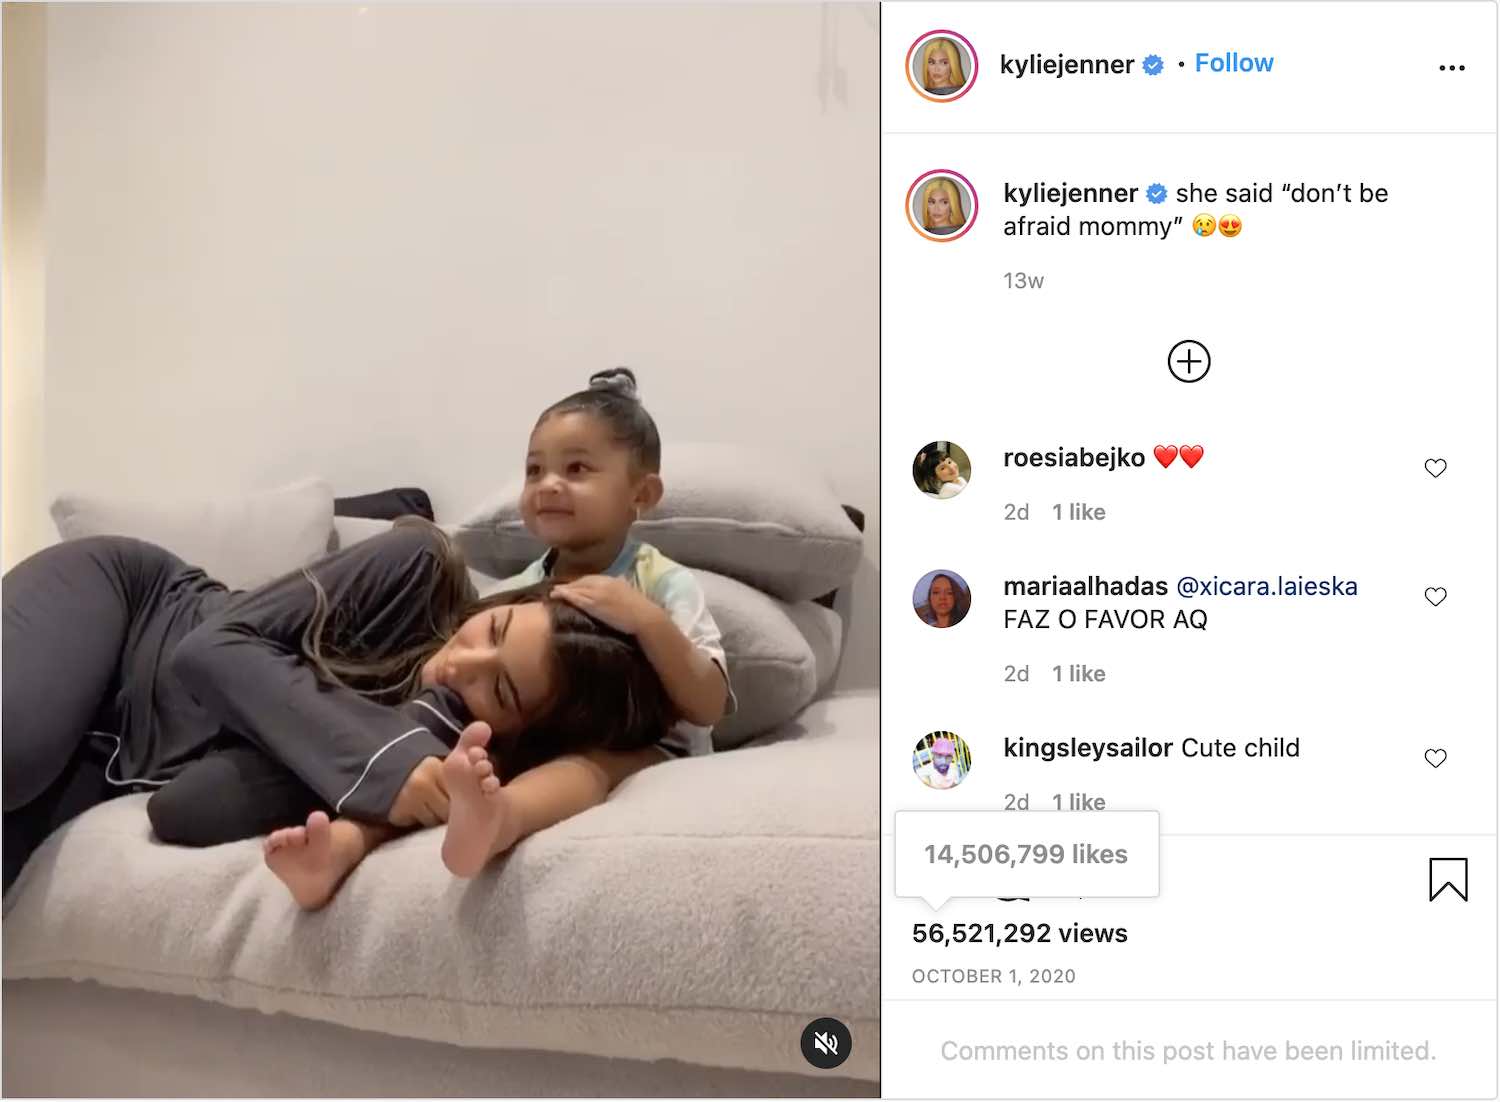 Kylie Jenner and Stormi's adorable video has been watched over 56 million times.